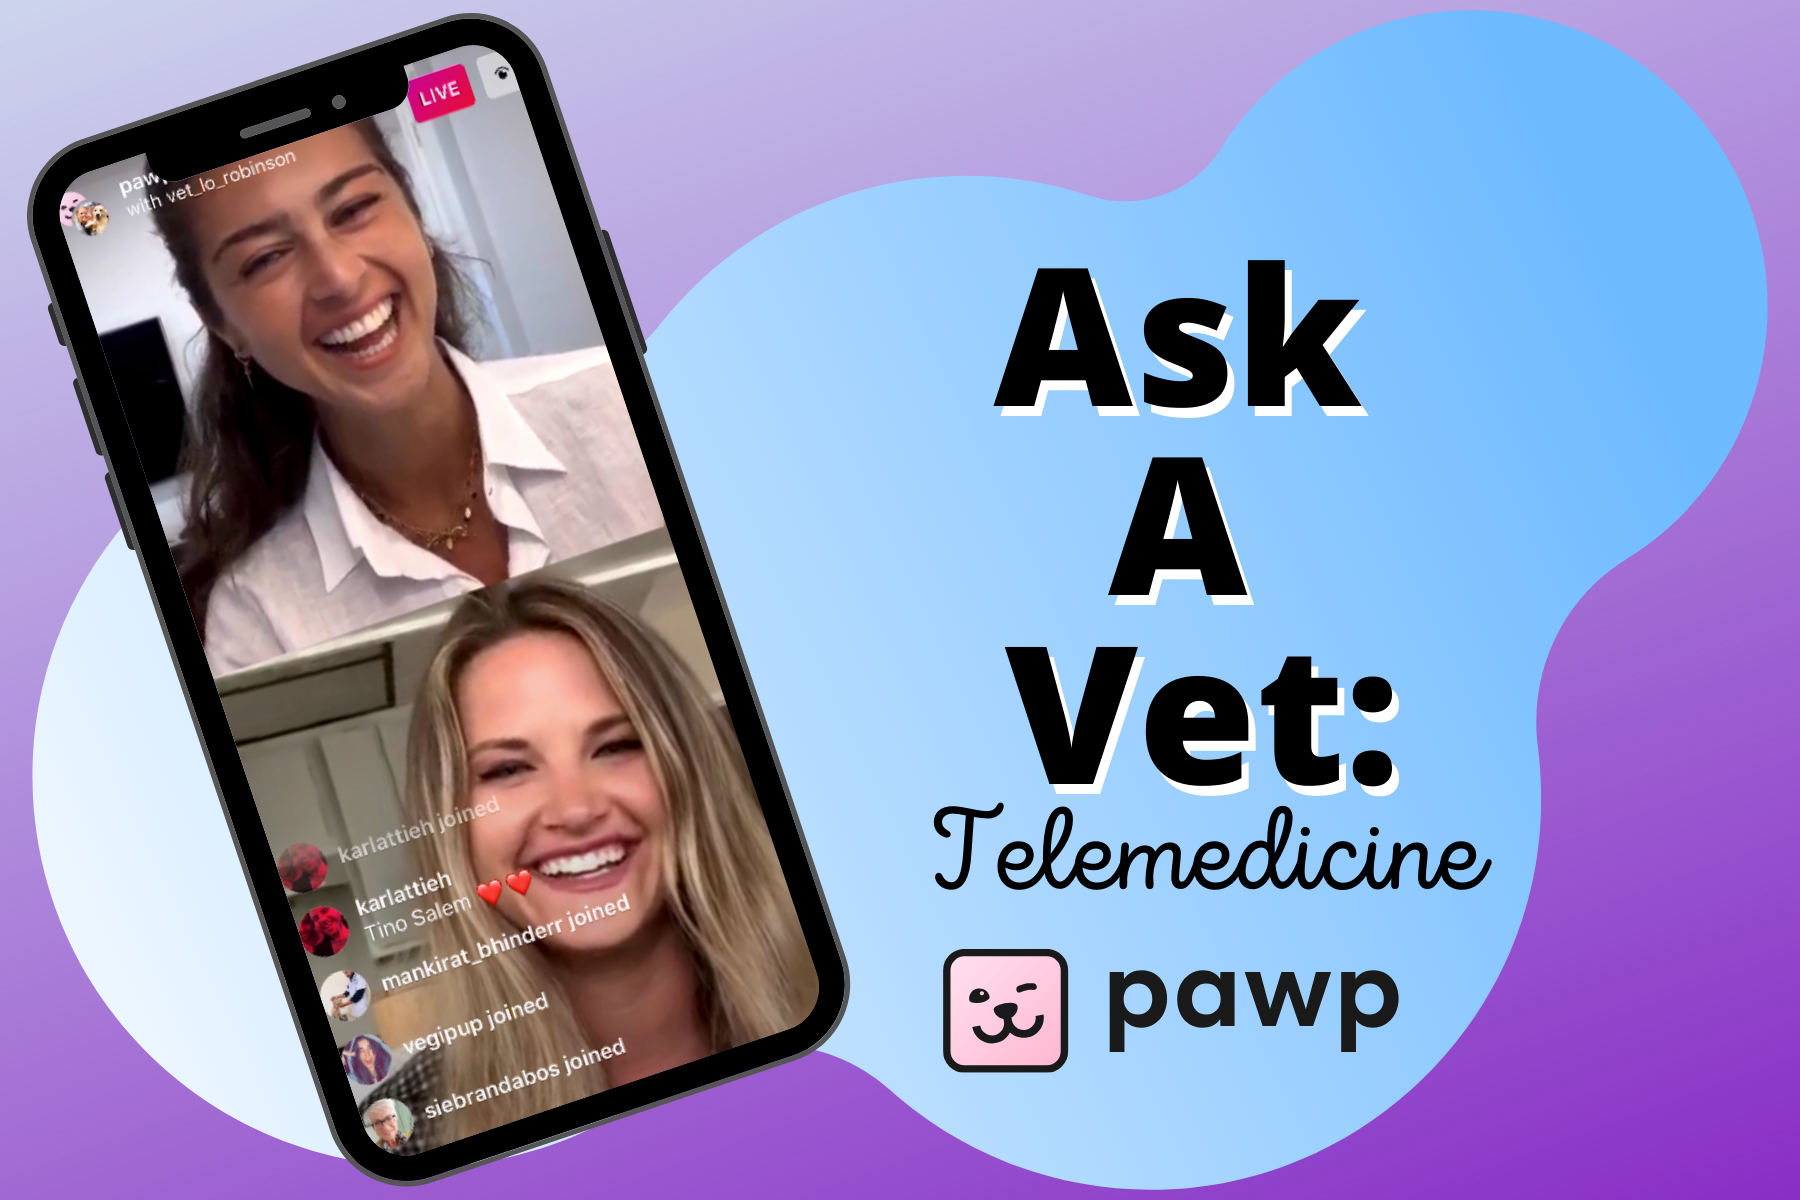 We Asked A Vet About Pawp's 24/7 Clinic, Texting A Vet & Telemedicine